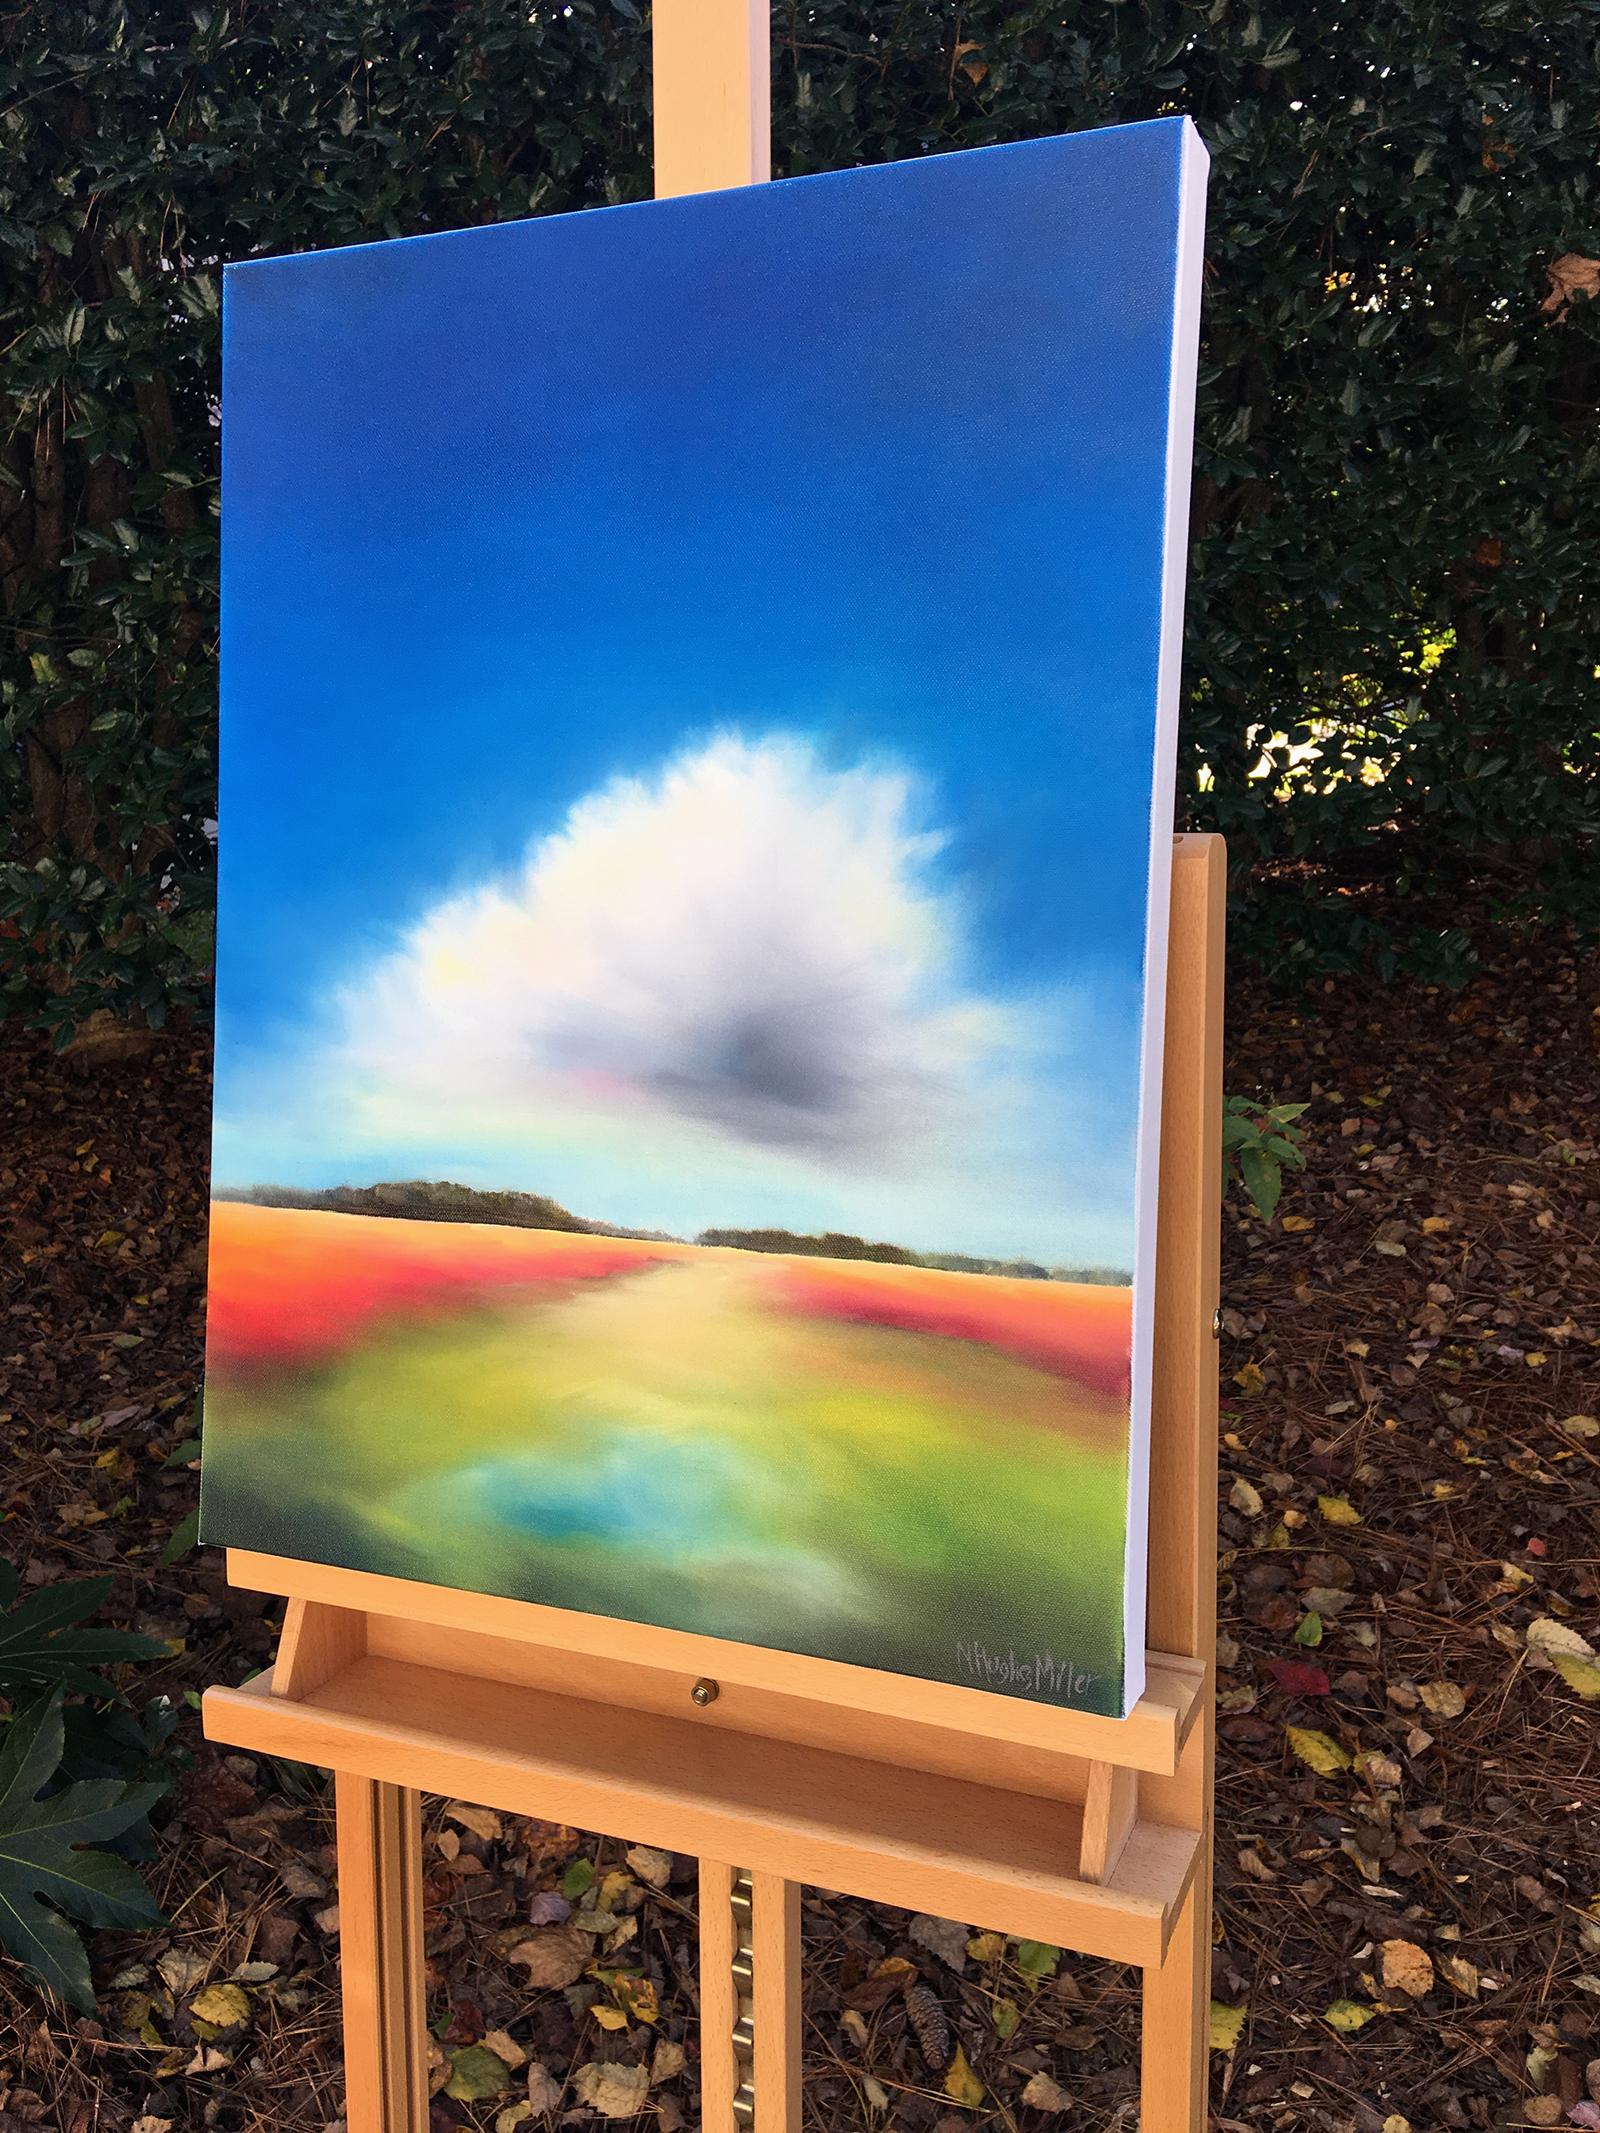 <p>Artist Comments<br>Red fields lead to a dark wooded forest in my imagined landscape. A single cloud above lends tranquility to the scene.</p><p>About the Artist<br>Reflected in Nancy Hughes Miller’s paintings are the coastal and rural